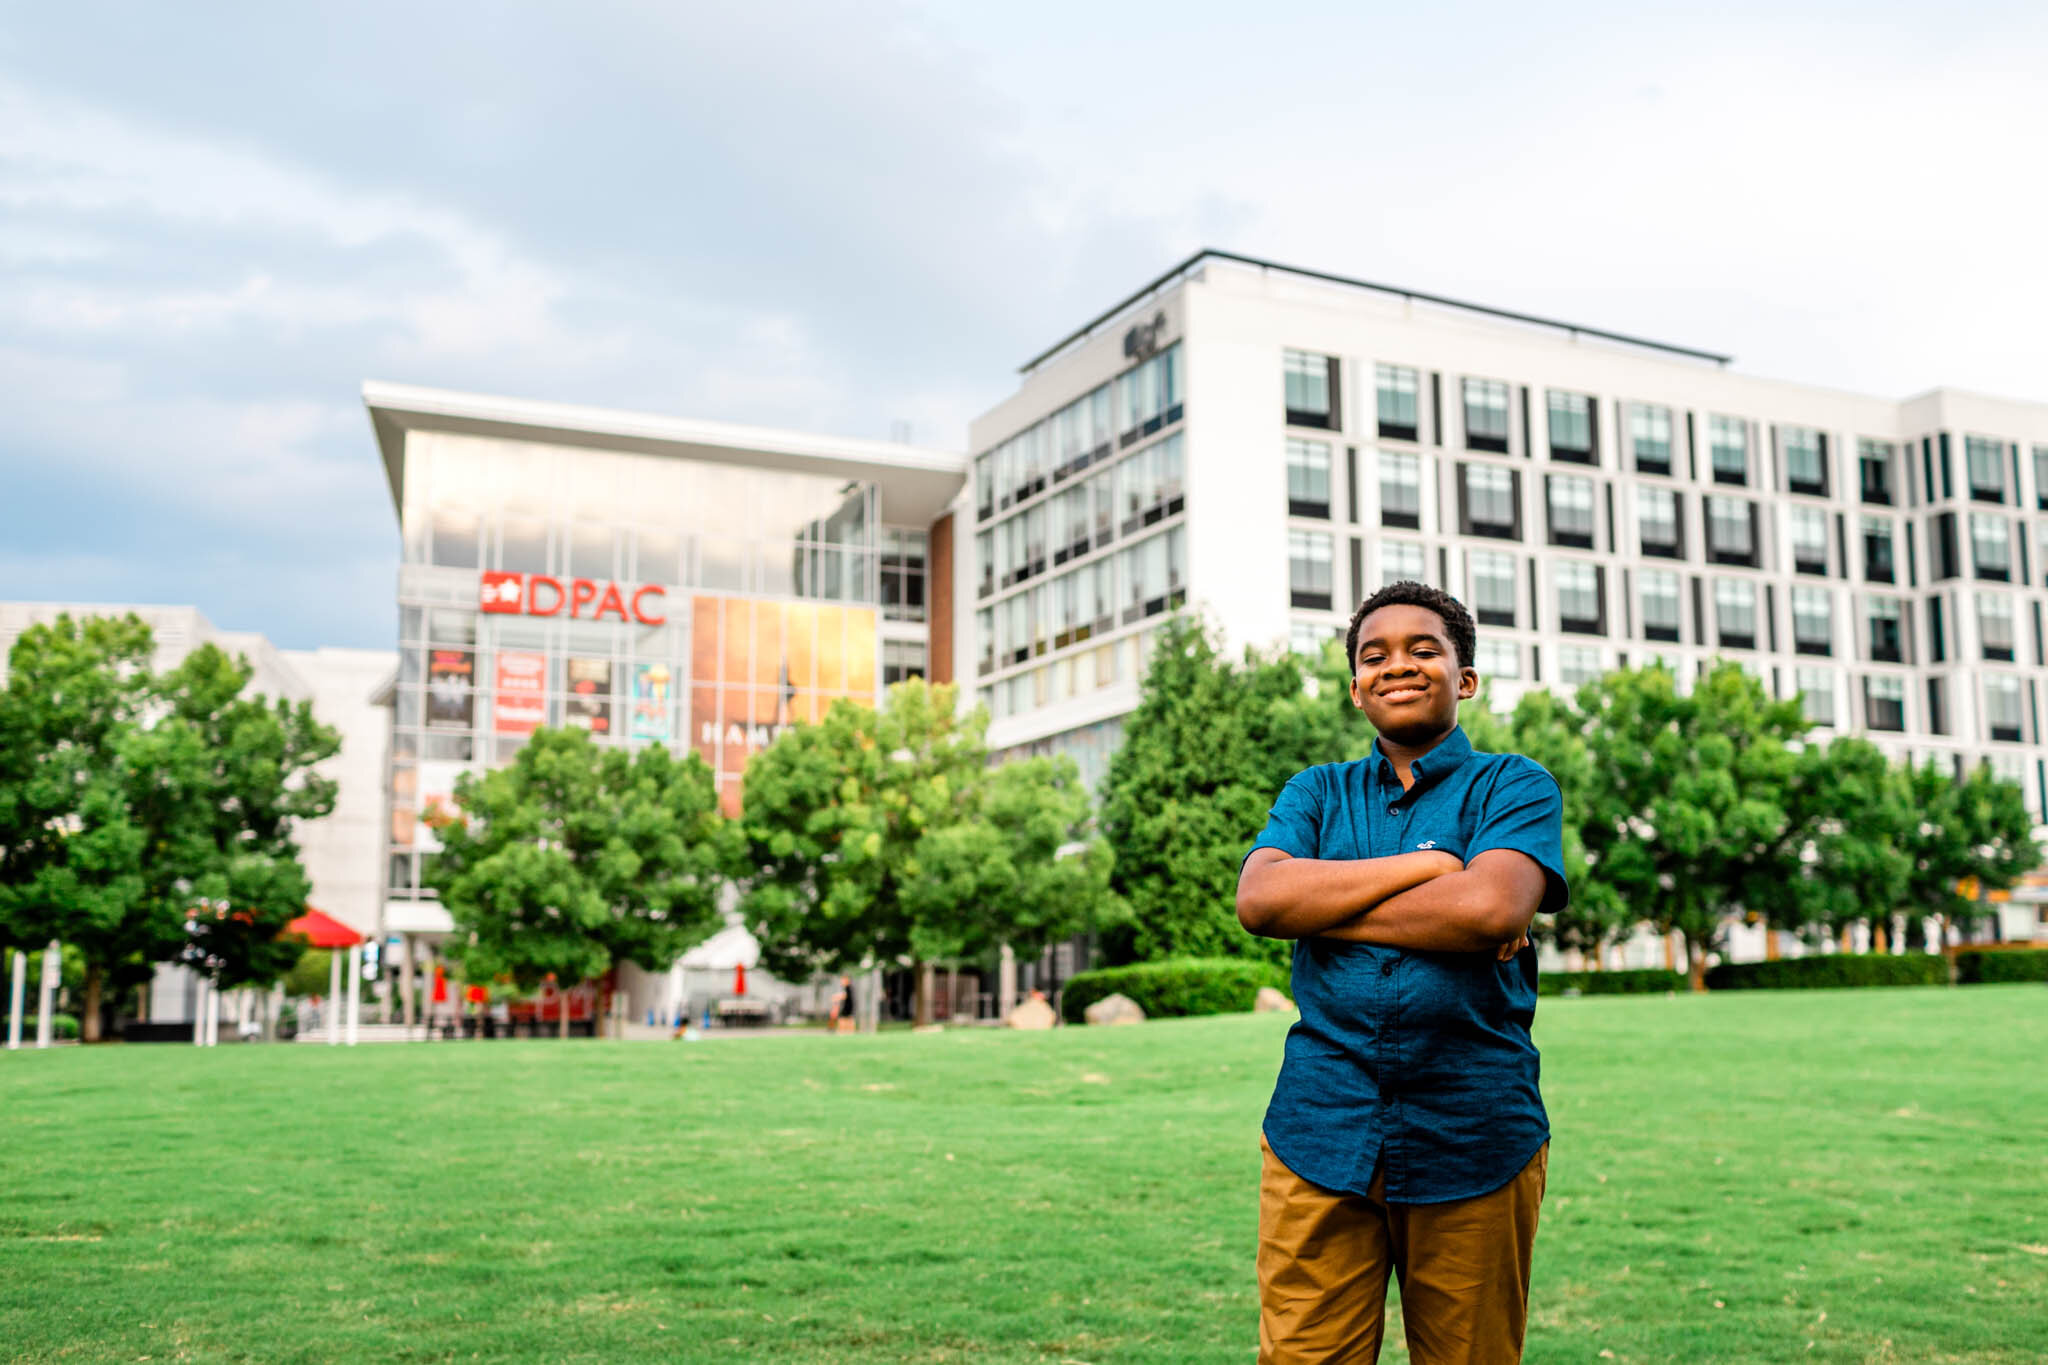 Durham Family Photographer | By G. Lin Photography | DPAC | Young boy standing next to building